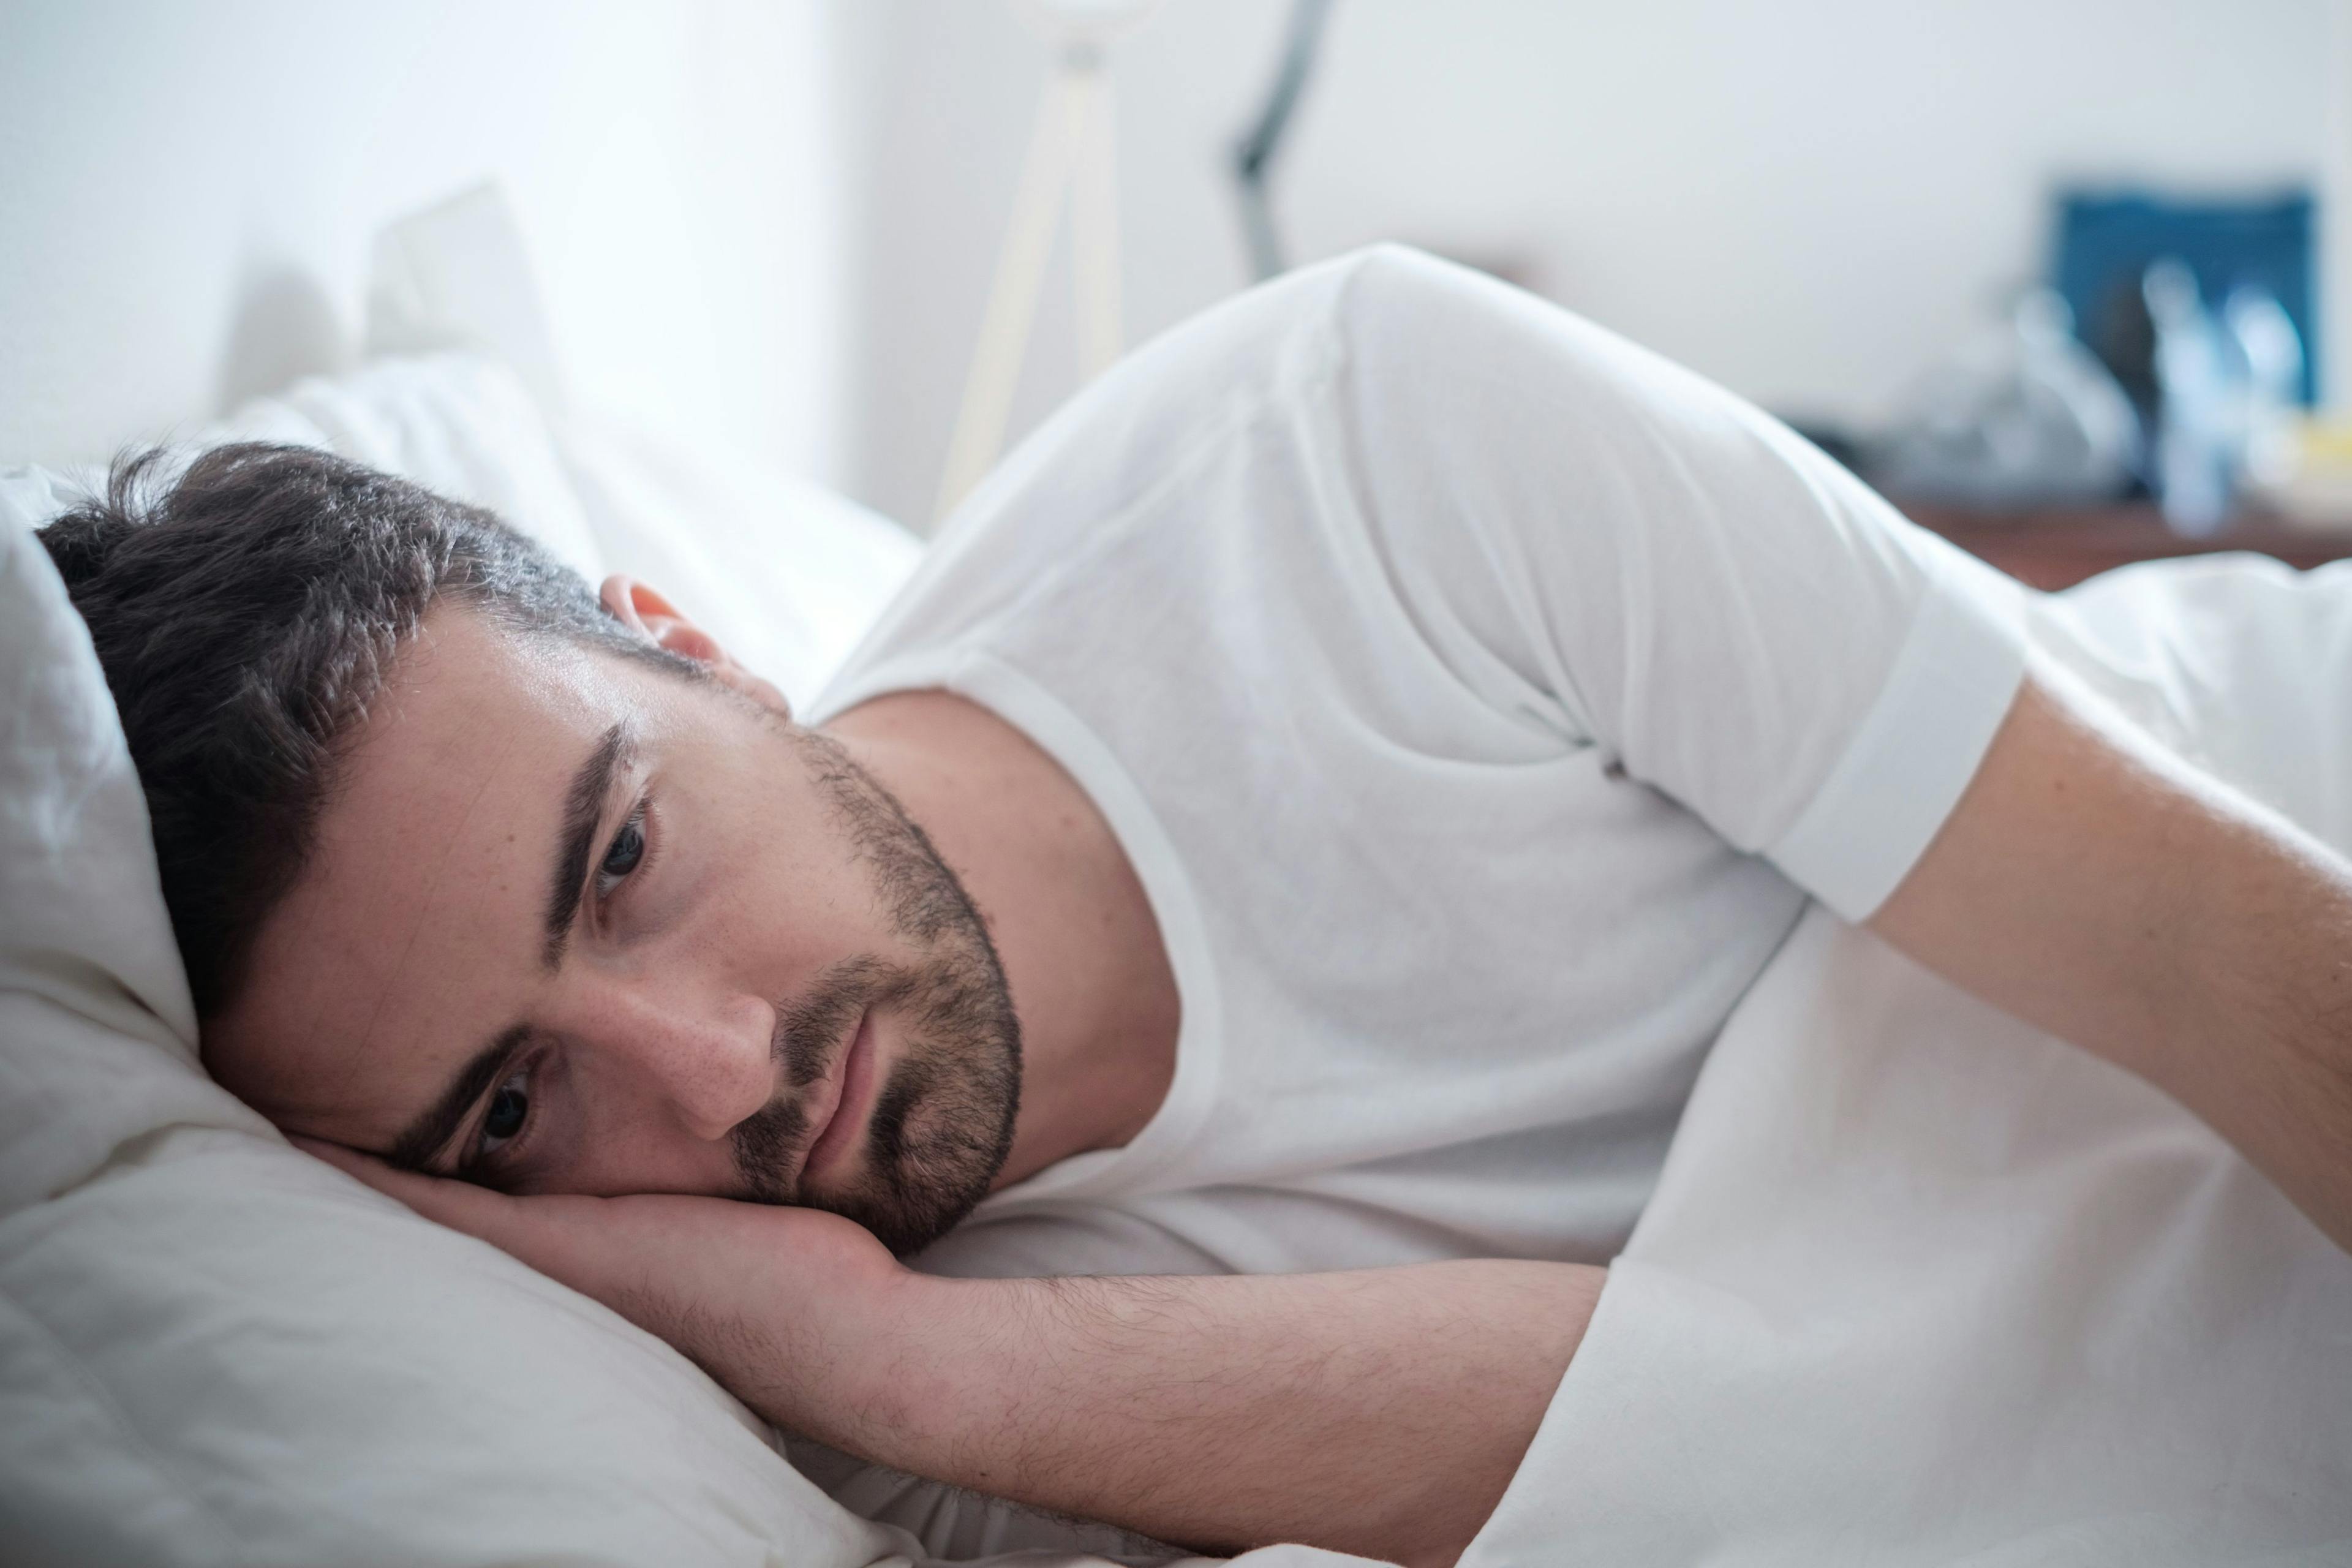 Patients with Diabetes at Increased Risk of Sleep Disorders, Could Increase Complications Risk